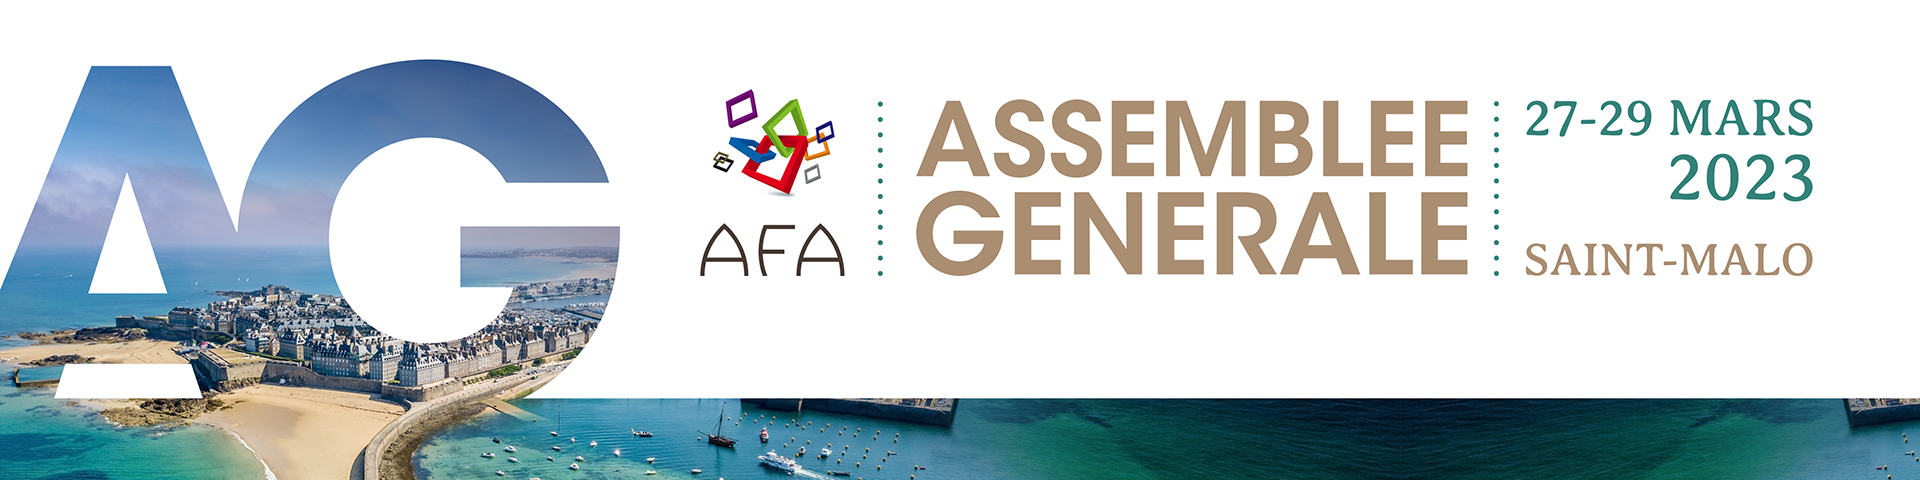 VIsual Slide General Assembly of the AFA: Association of Accor Franchisees - March 27-29, 2023